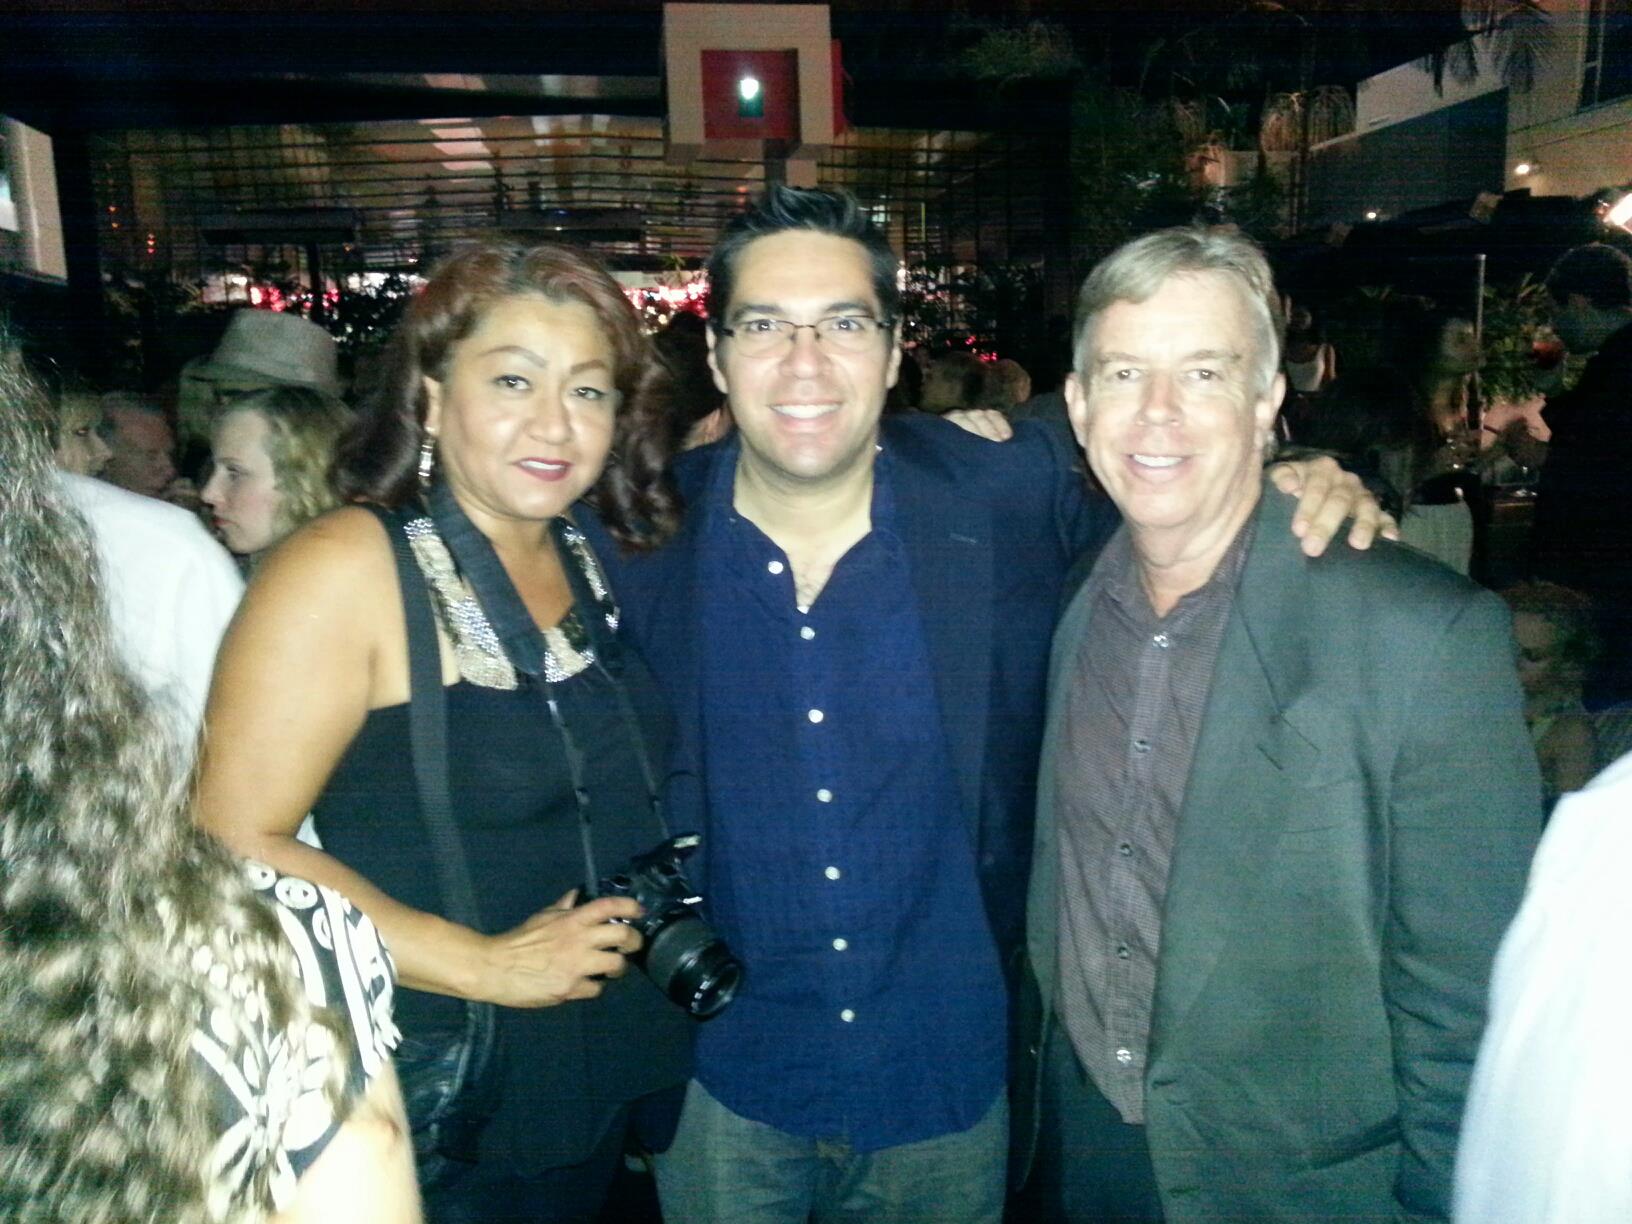 With Rose Arzate and Aaron Sanchez at the 'Least Among Saints' release party, Oct. 1, 2012.